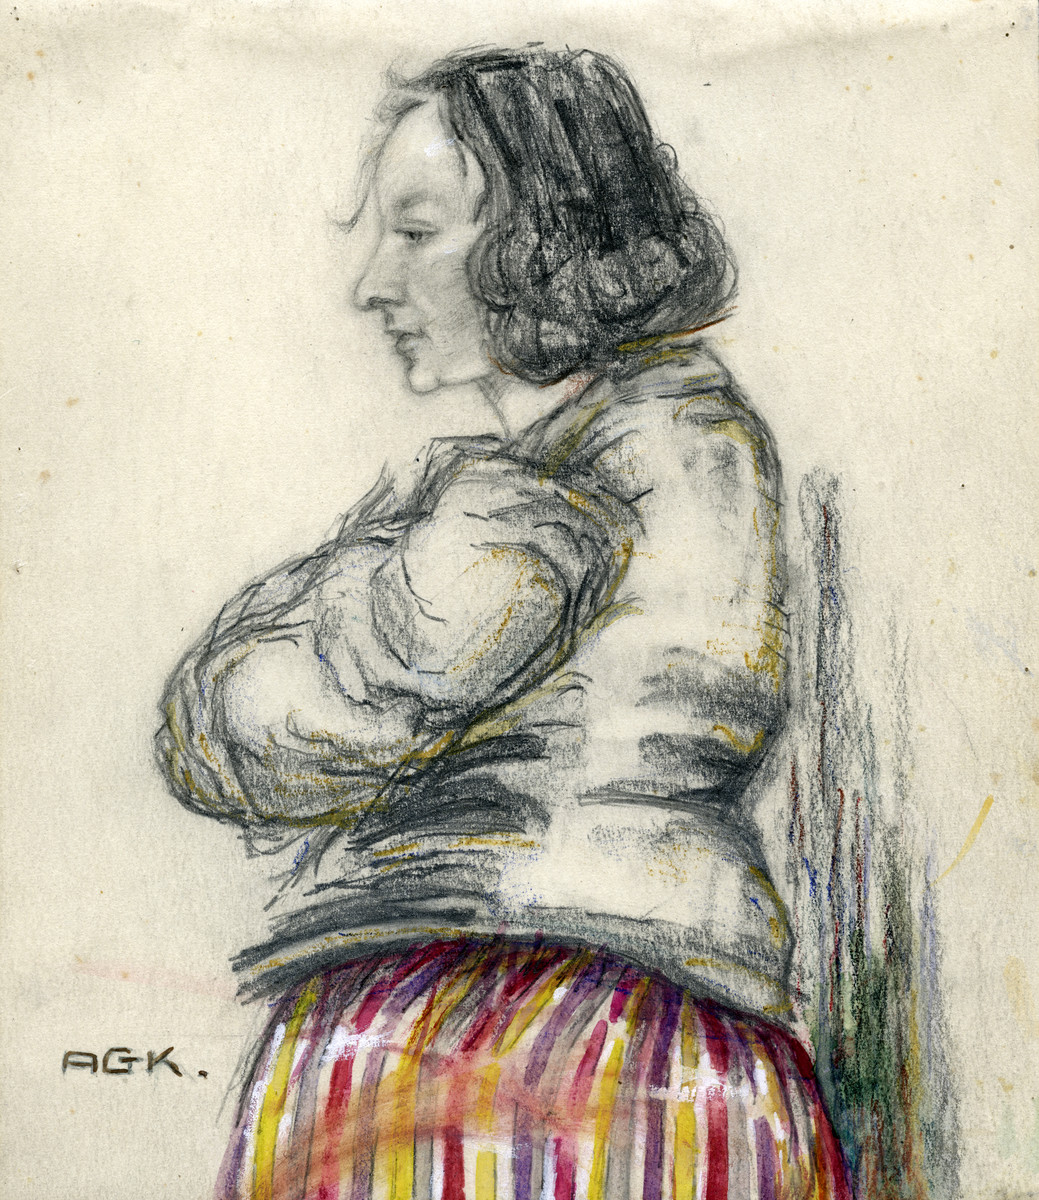 Portrait of Hella Bacmeister drawn by her cousin while she was a forced laborer in Germany.